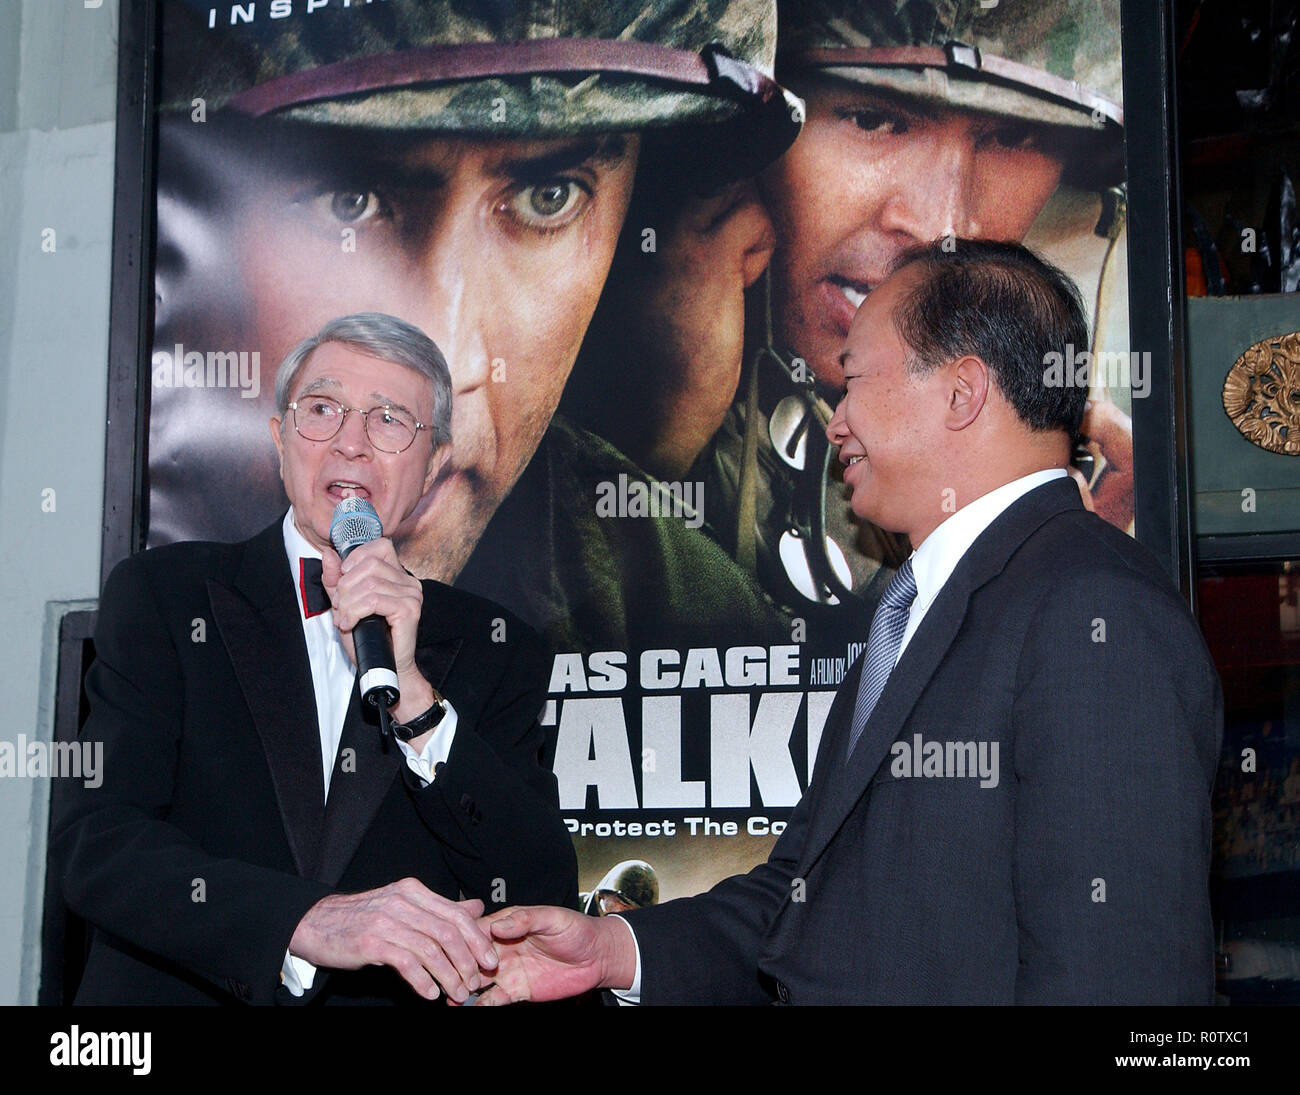 Army Archerd and the director John Woo at the Windtalkers premiere at the Chinese Theatre in Los Angeles. June 11, 2002.          -            Archerd Stock Photo